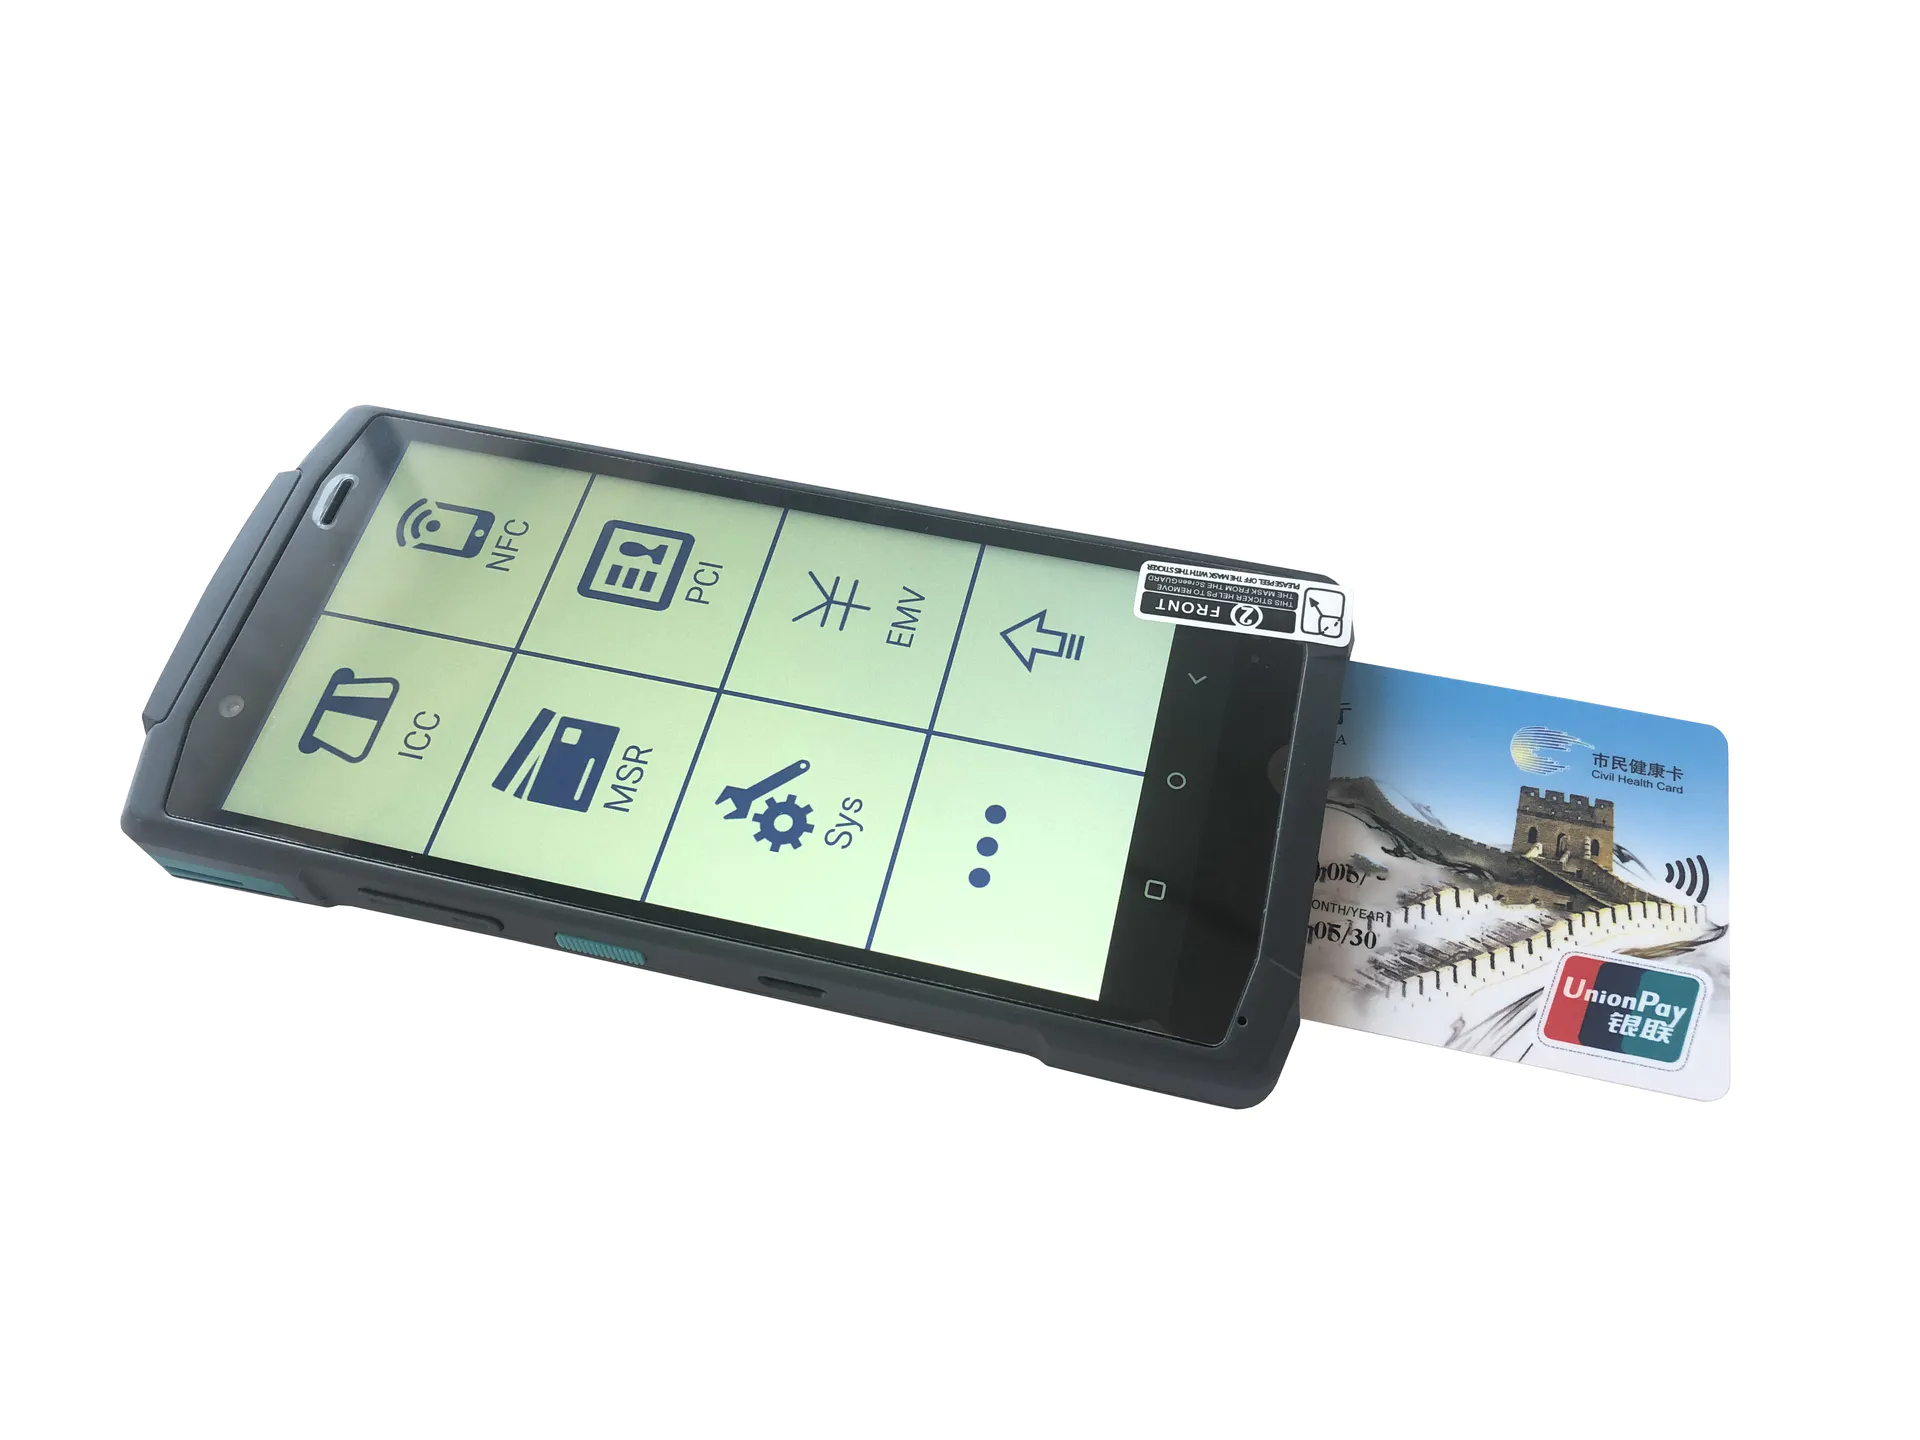 Android 10.0 Handheld POS Terminal with Barcode Scanner